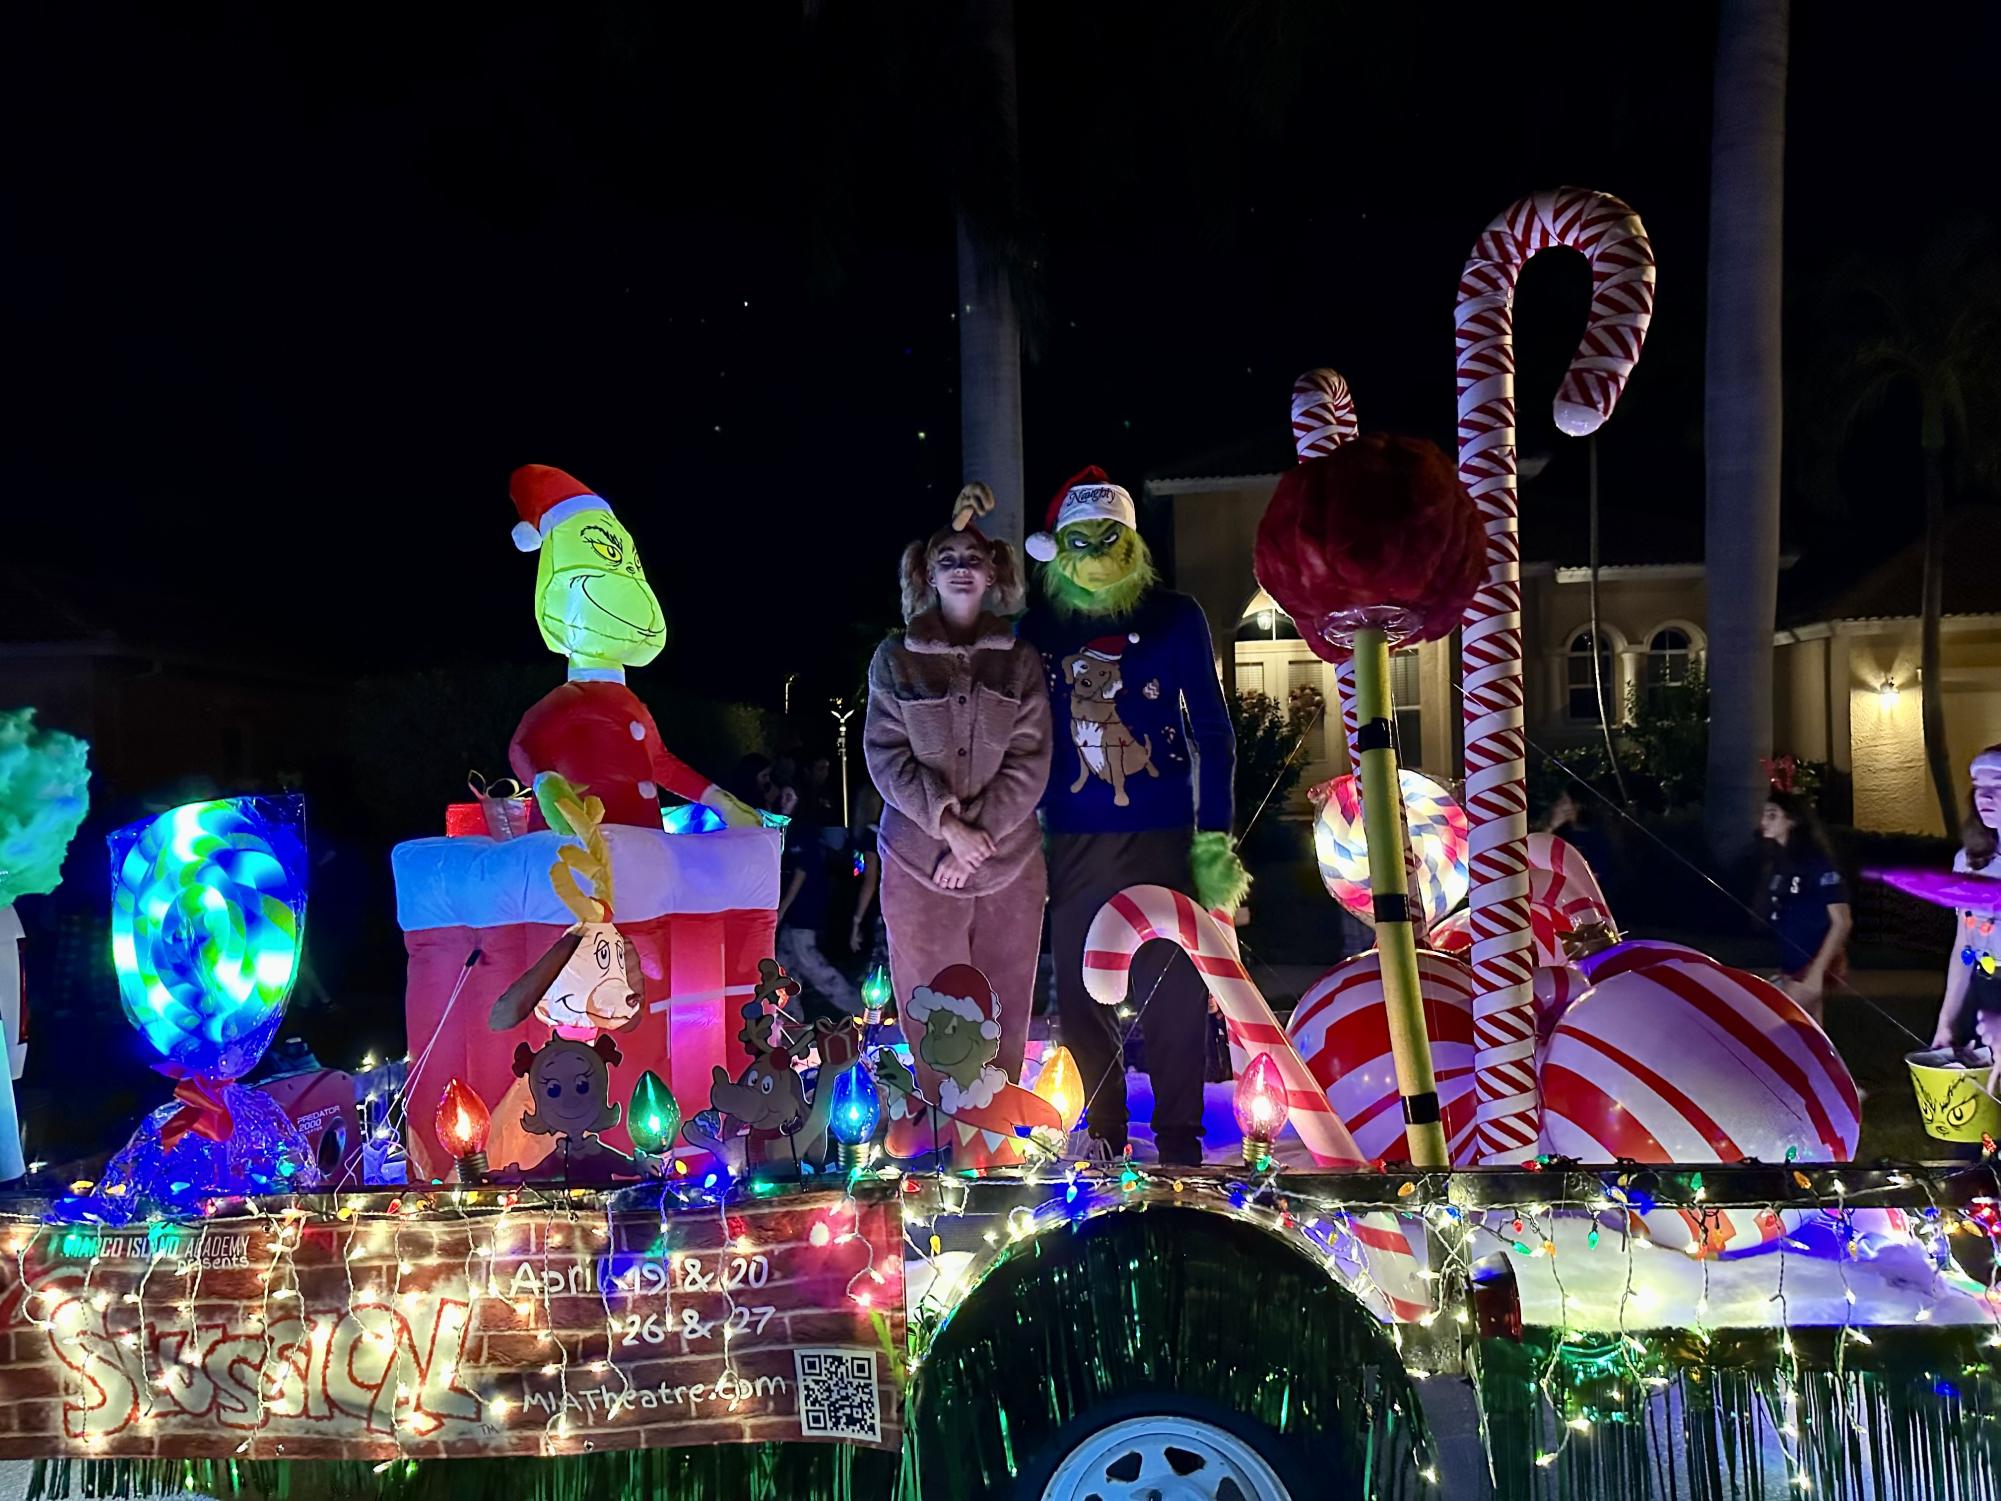 Photo credit to Janet Ferro. The Grinch and Max stand on the Whoville-themed float adorned with lights and colorful decorations.